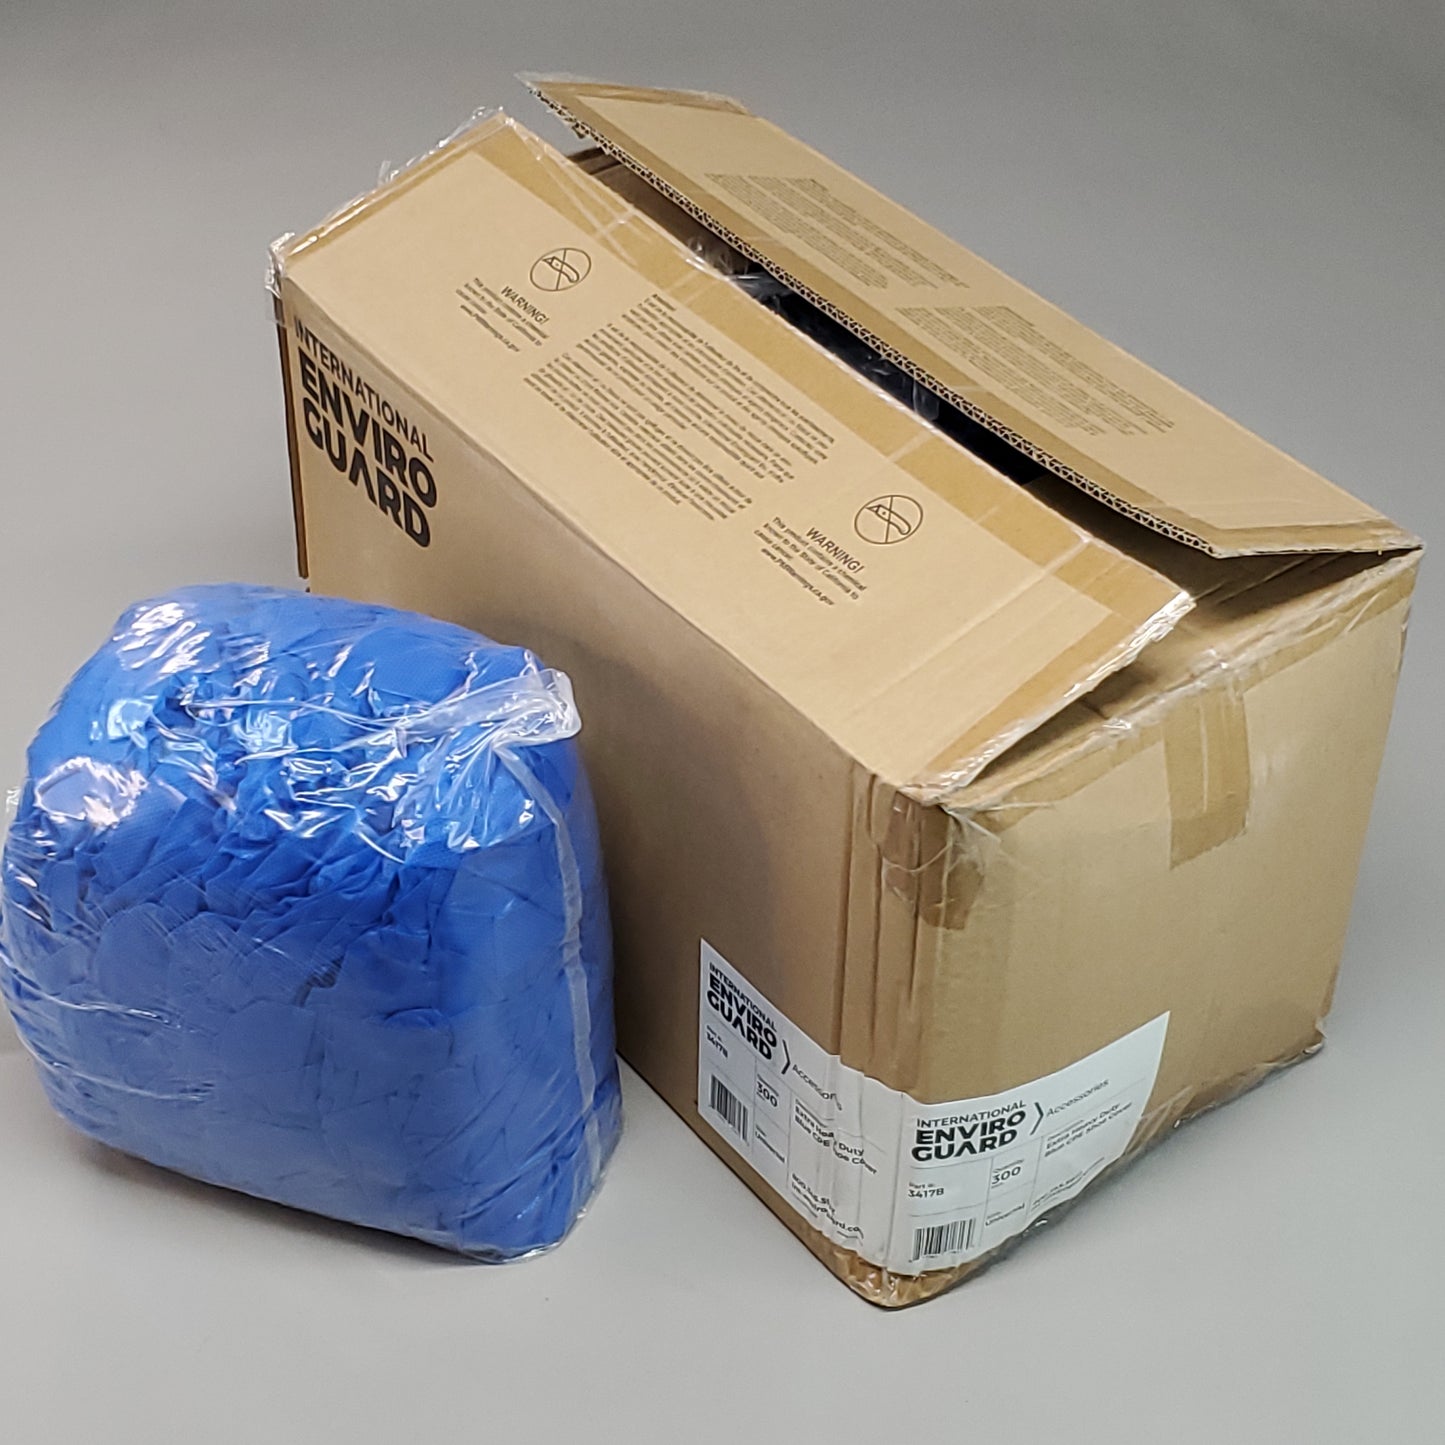 INTERNATIONAL ENVIRO GUARD Extra Heavy Duty Blue CPE Shoe Cover #3417B (New Other)